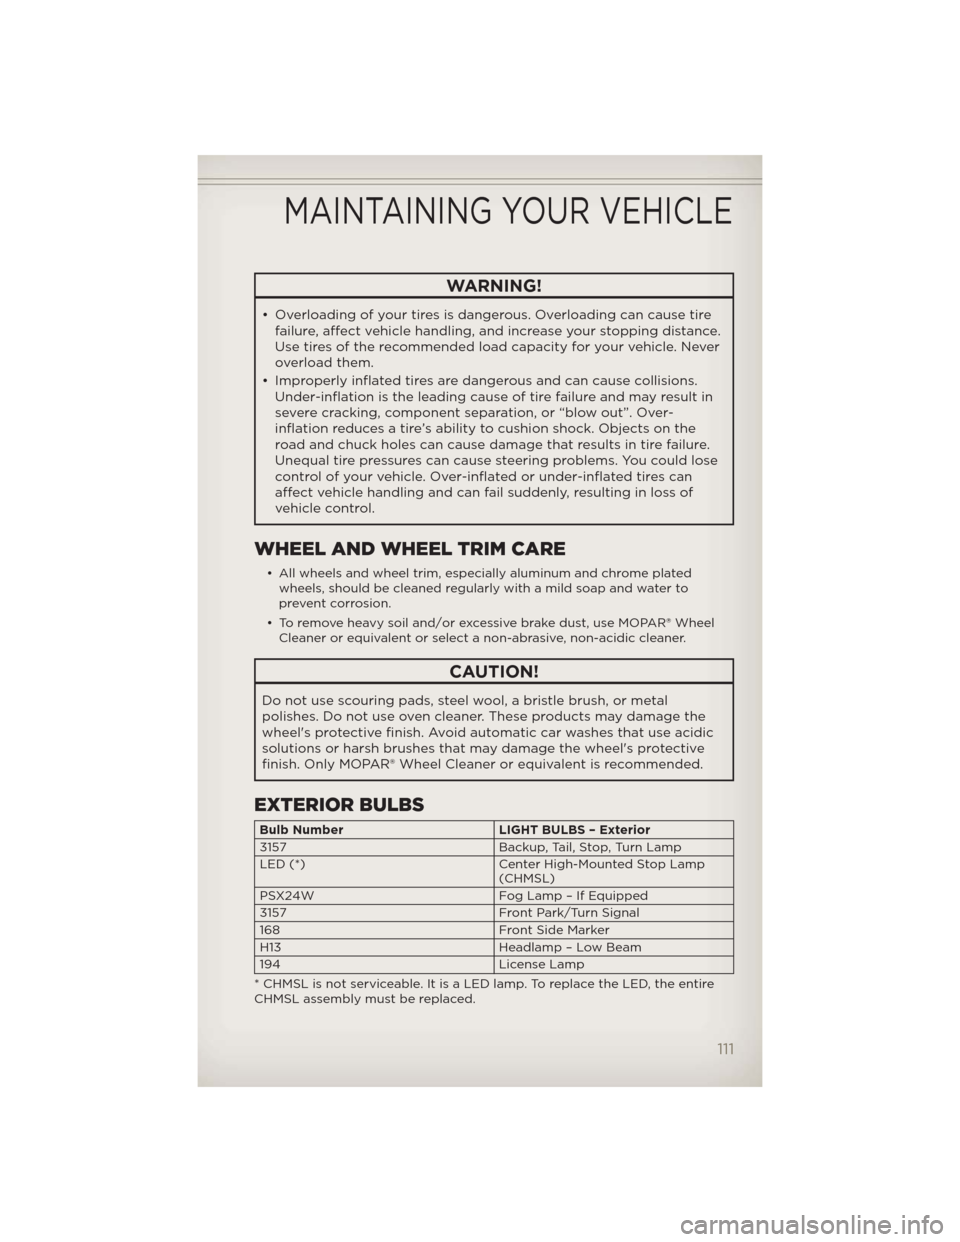 JEEP WRANGLER 2012 JK / 3.G User Guide WARNING!
• Overloading of your tires is dangerous. Overloading can cause tire
failure, affect vehicle handling, and increase your stopping distance.
Use tires of the recommended load capacity for yo